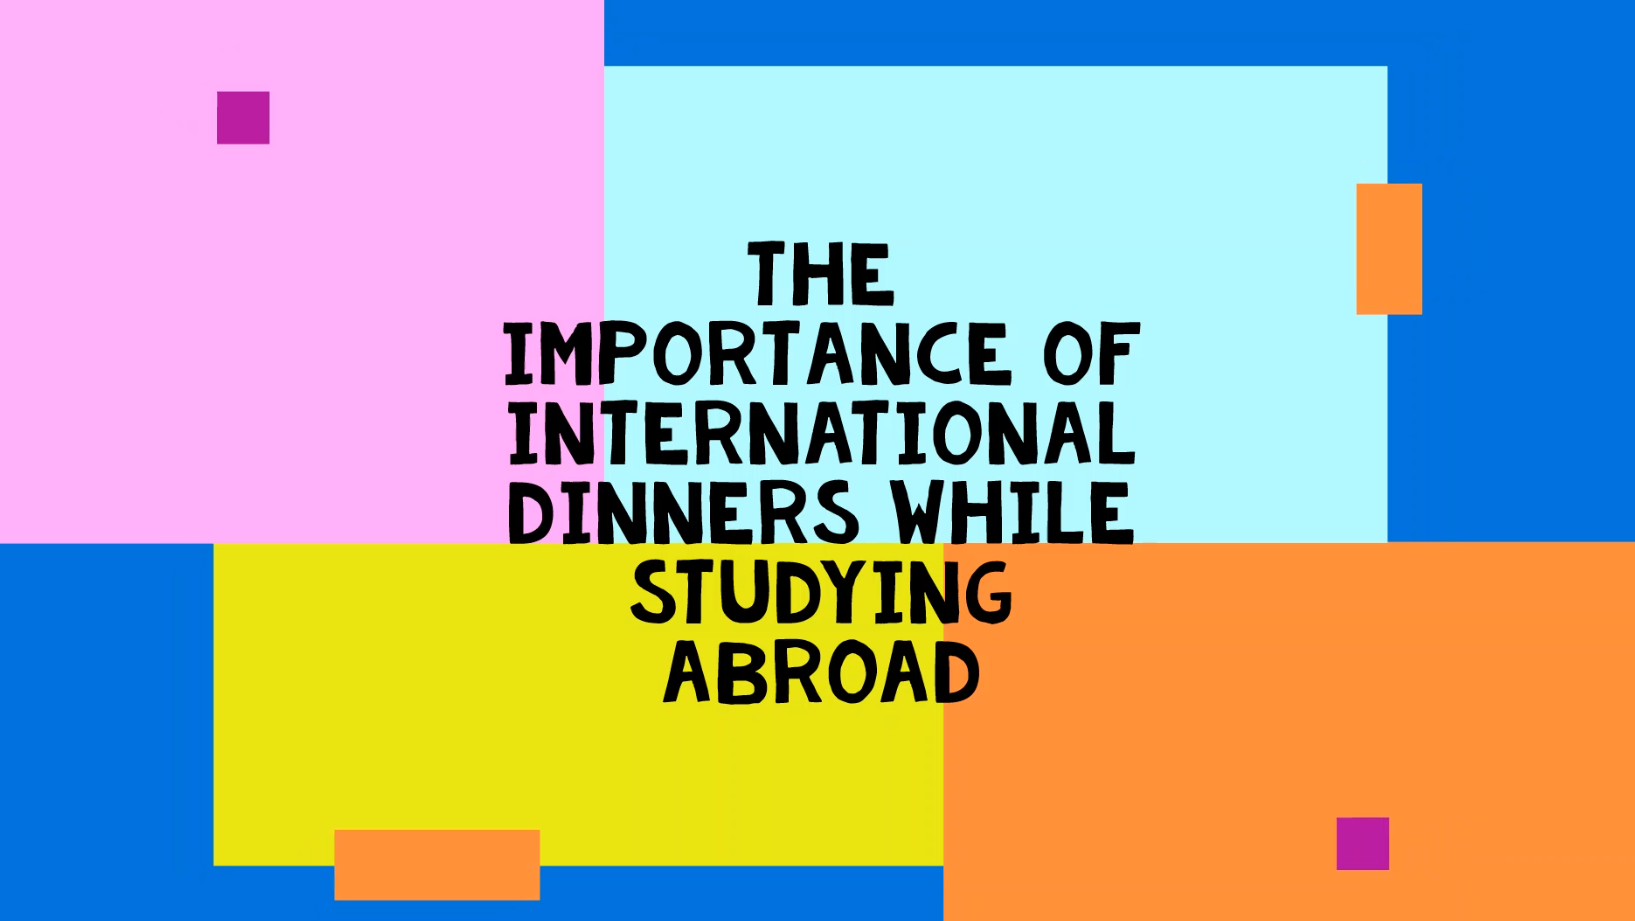 International dinners while studying abroad